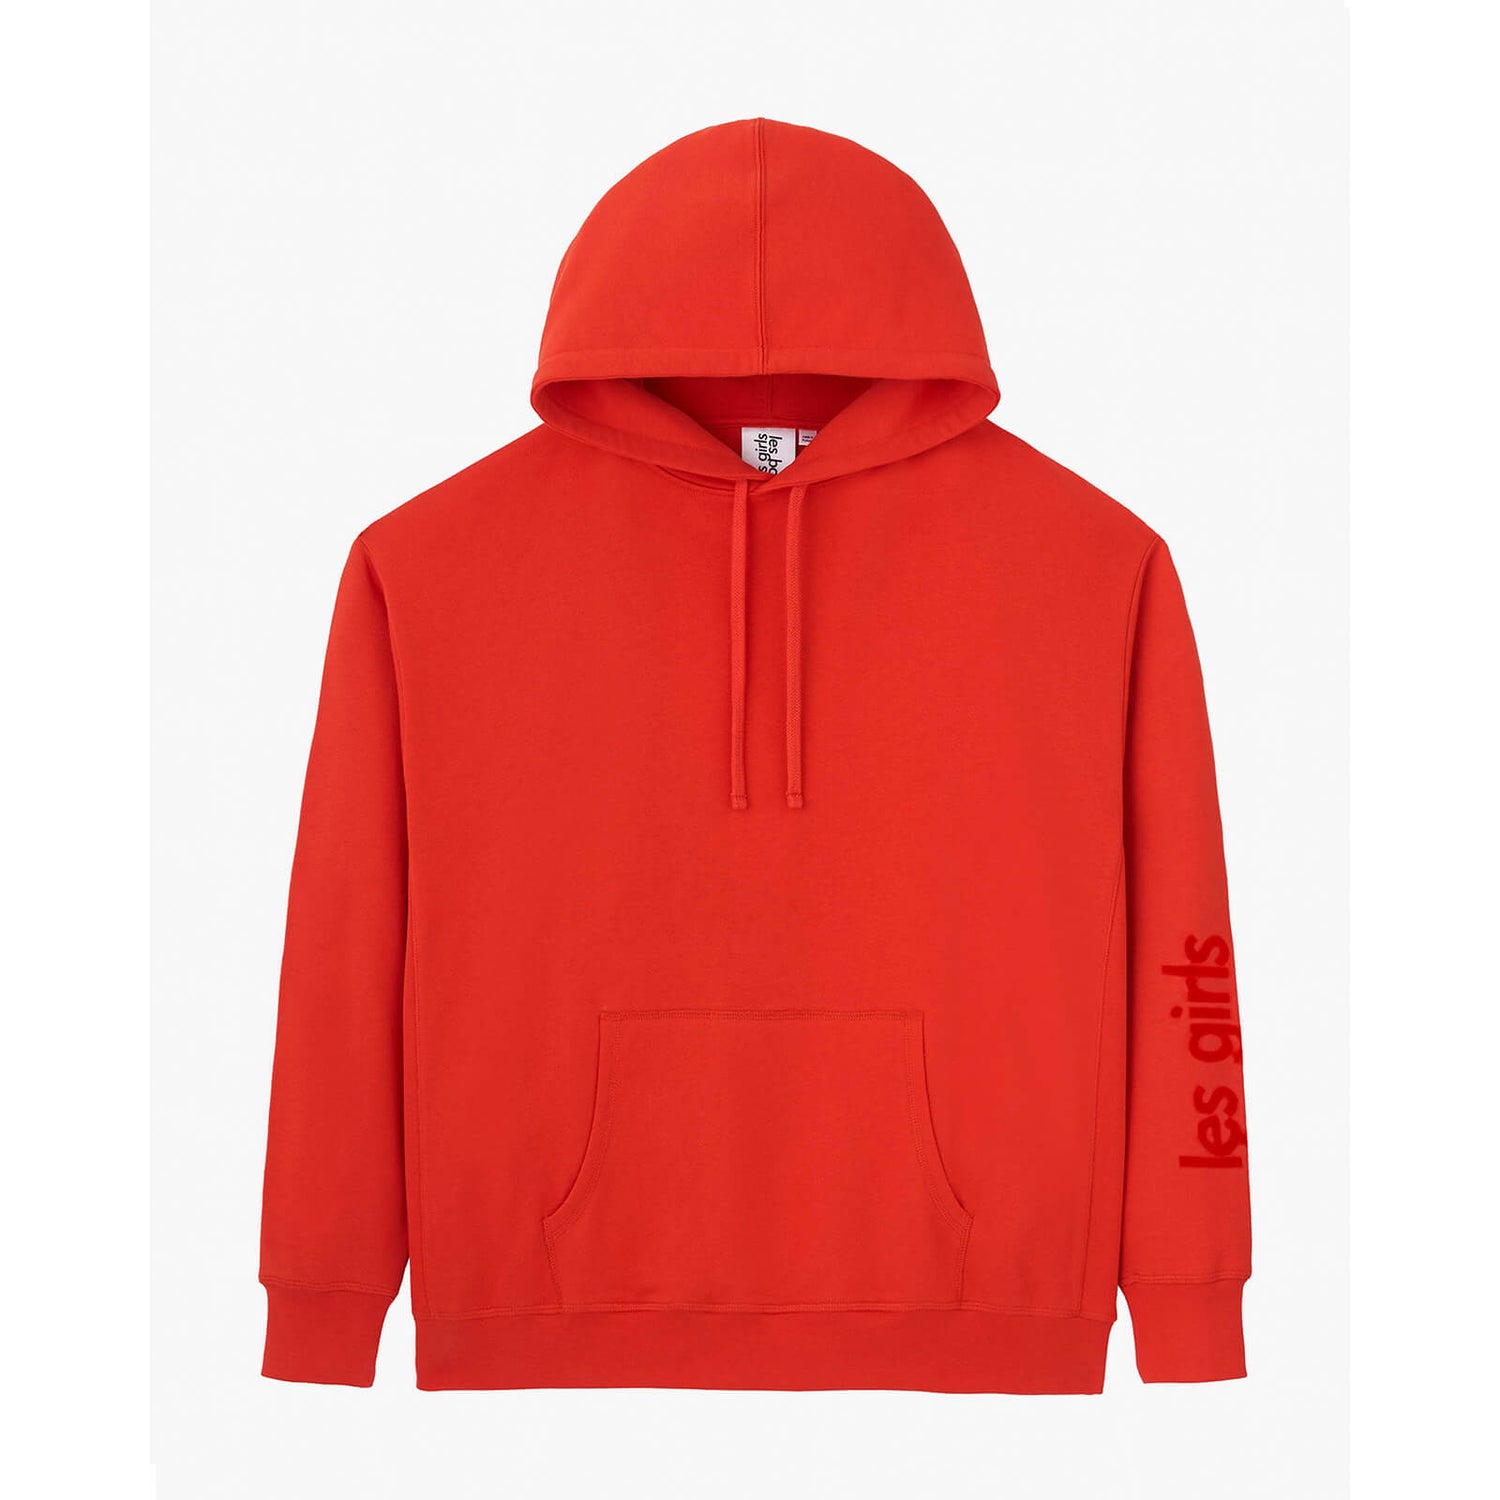 Les Girls Les Boys Women's Loopback Oversized Hoody - Red - XS